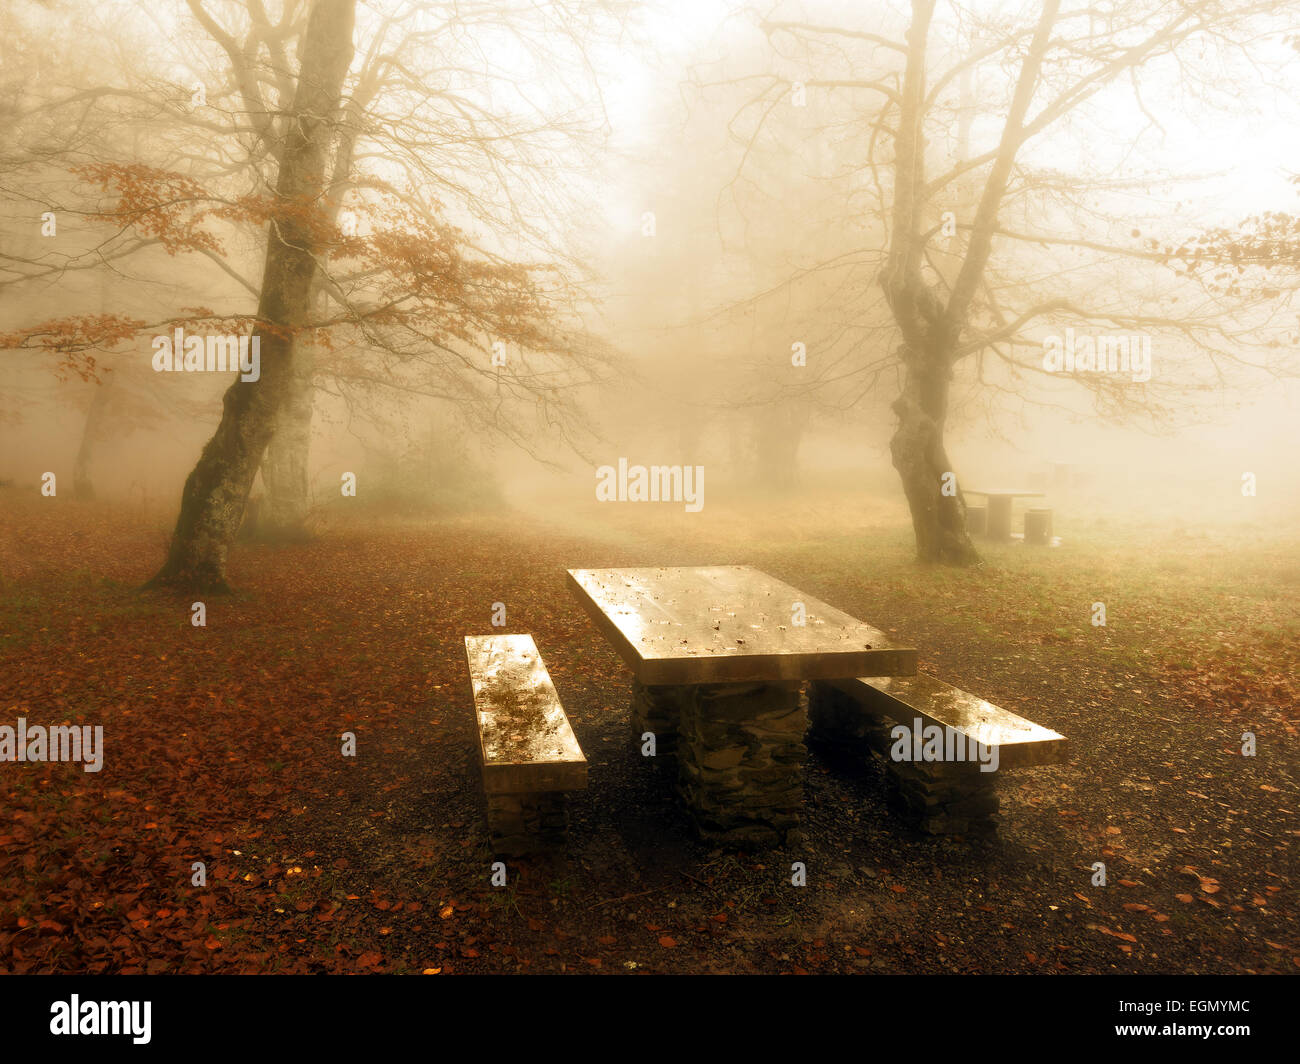 shiny picnic table in foggy forest Stock Photo